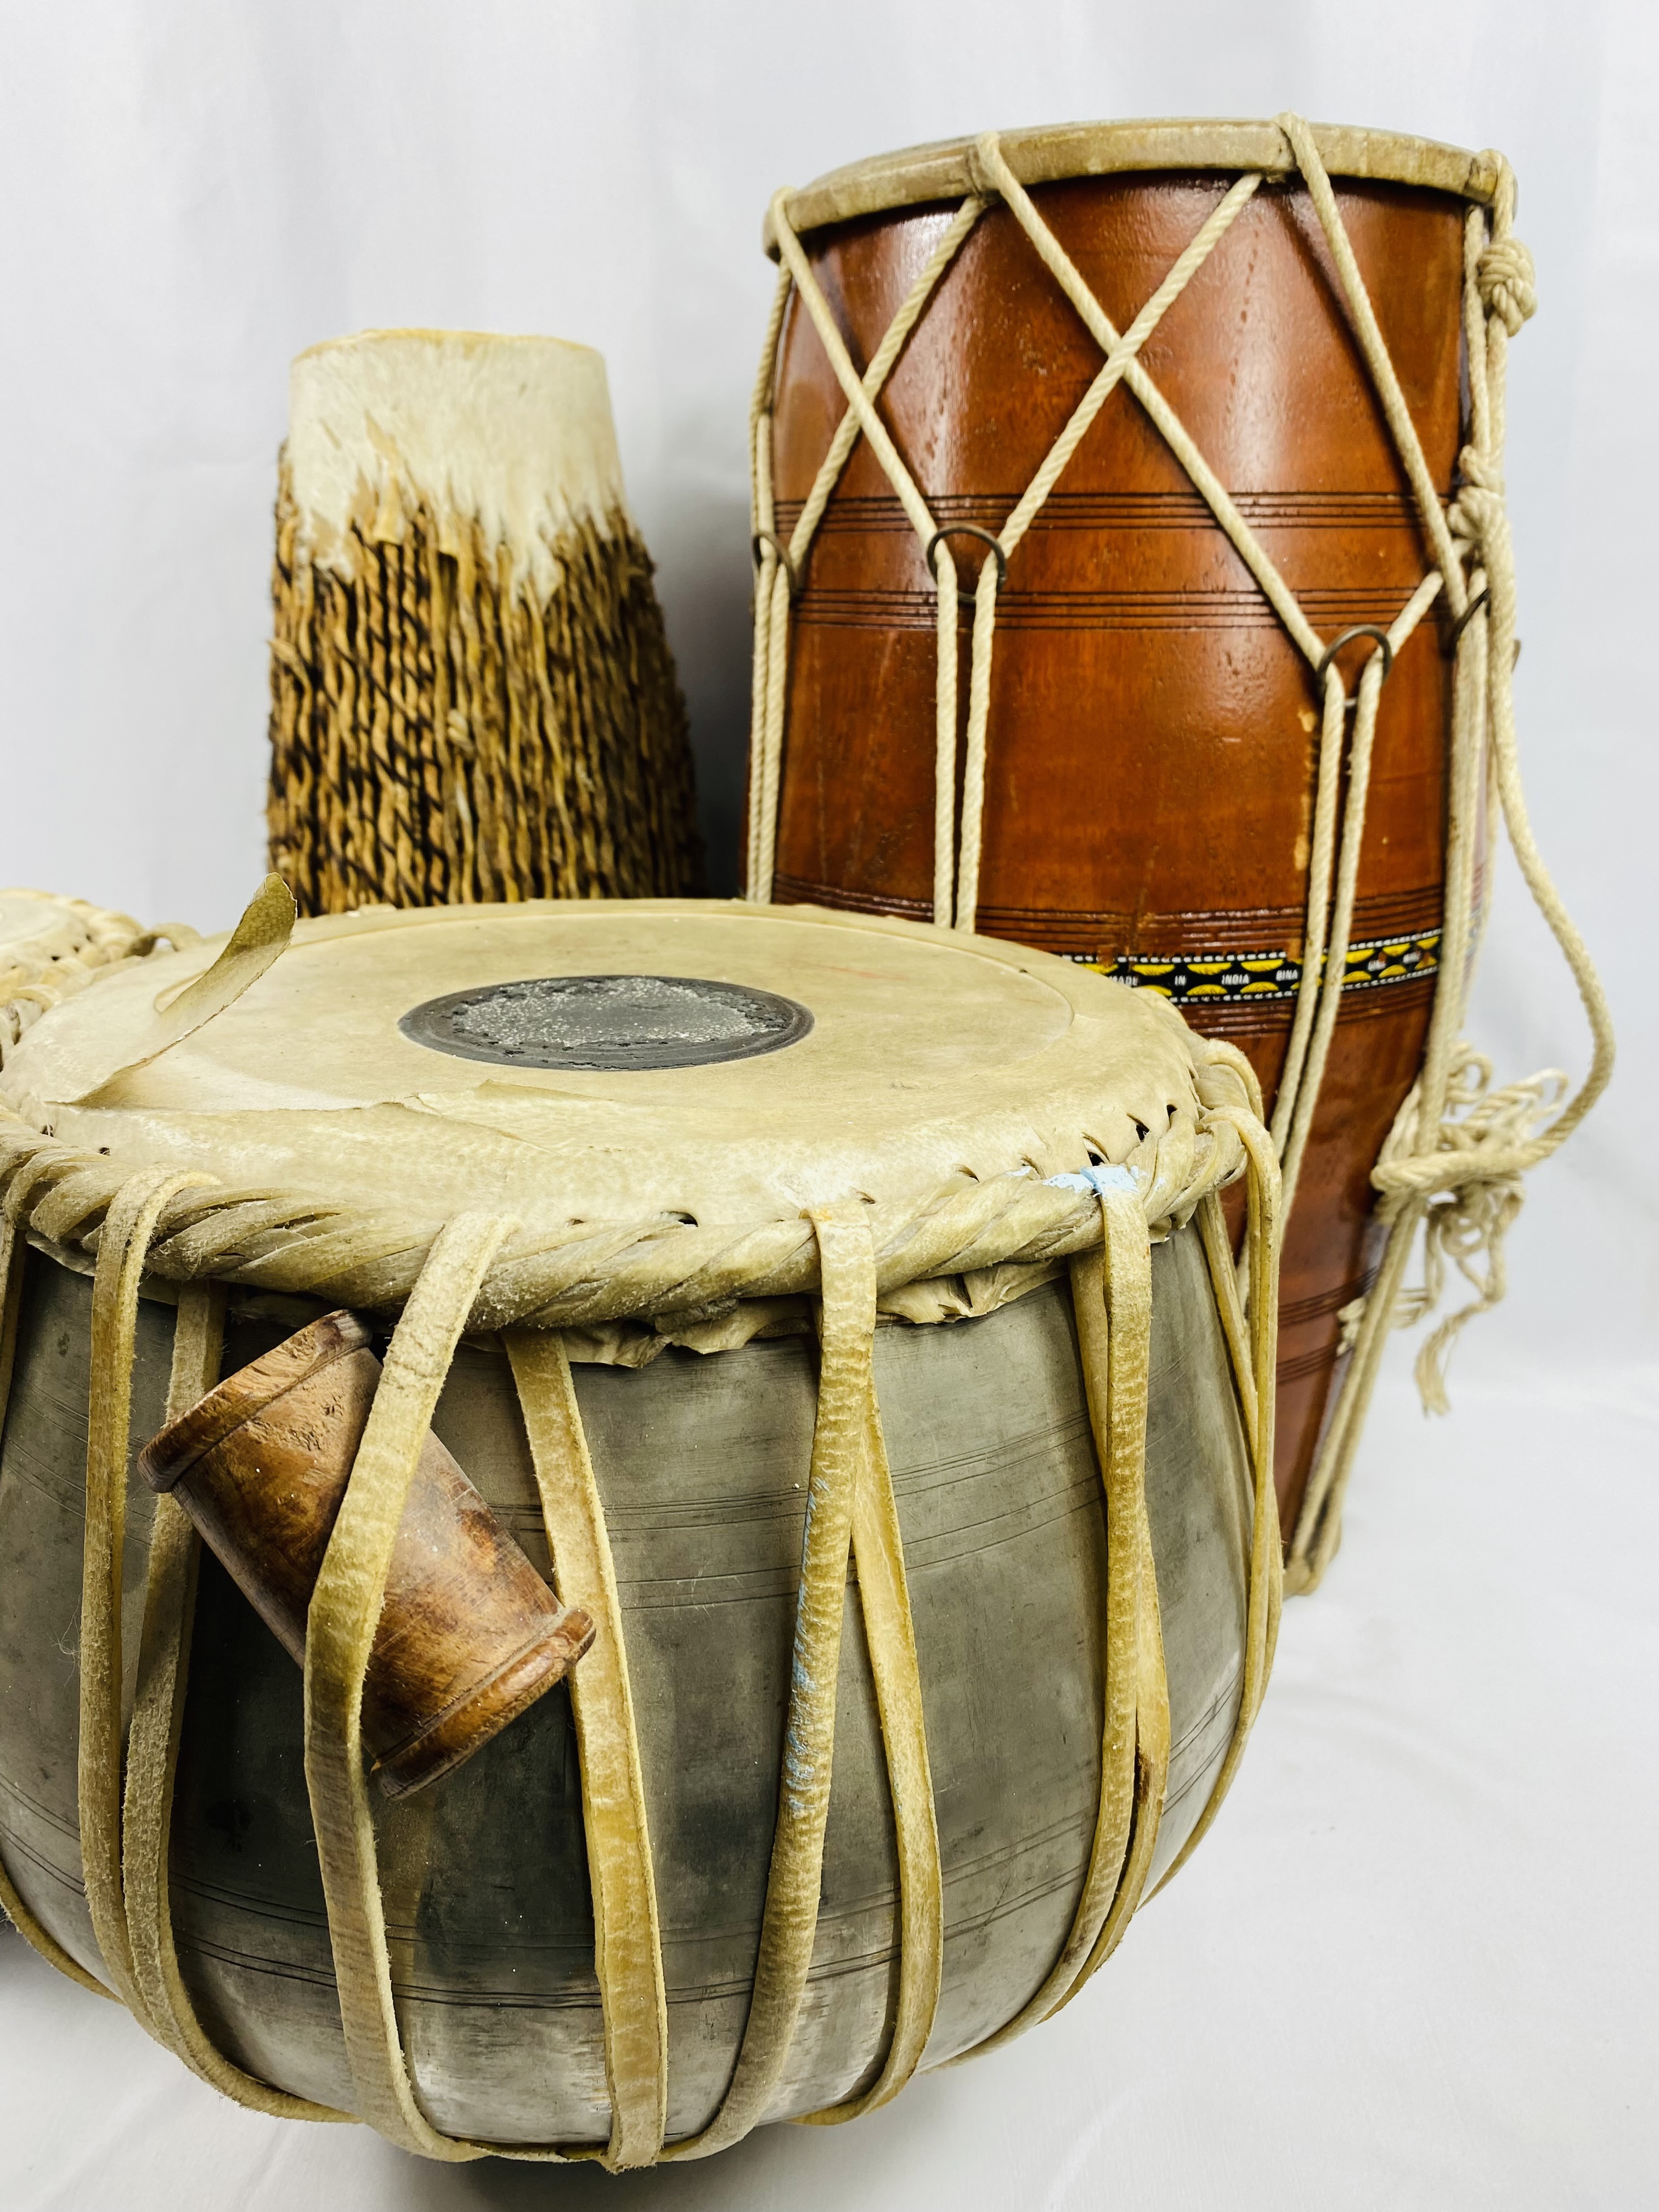 Four Indian drums - Image 3 of 4